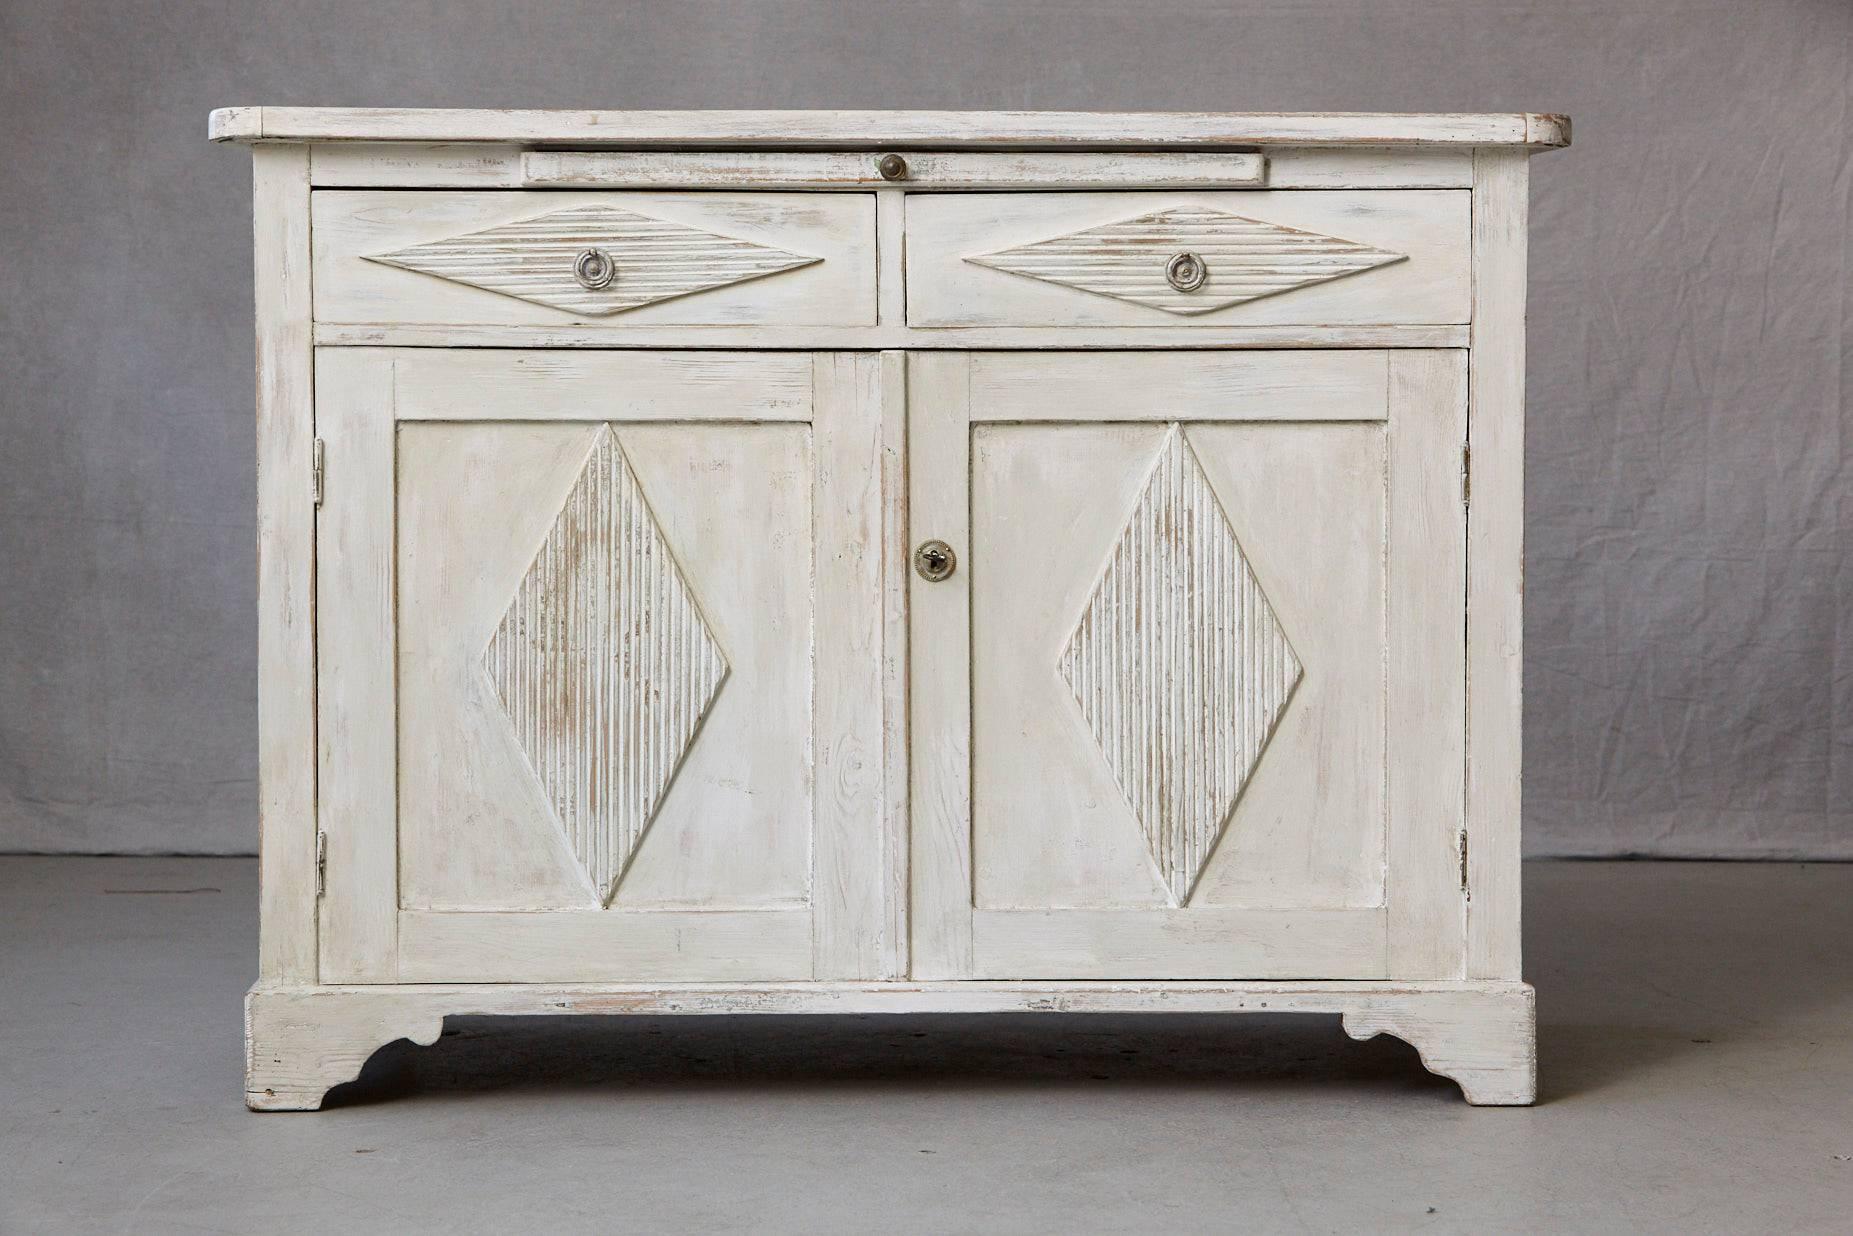 Swedish sideboard from the Gustavian period, two doors with diamond shaped and reeded carvings, which open into a single shelf. Two drawers also with diamond shaped and reeded carvings above with an additional integrated serving tray. All